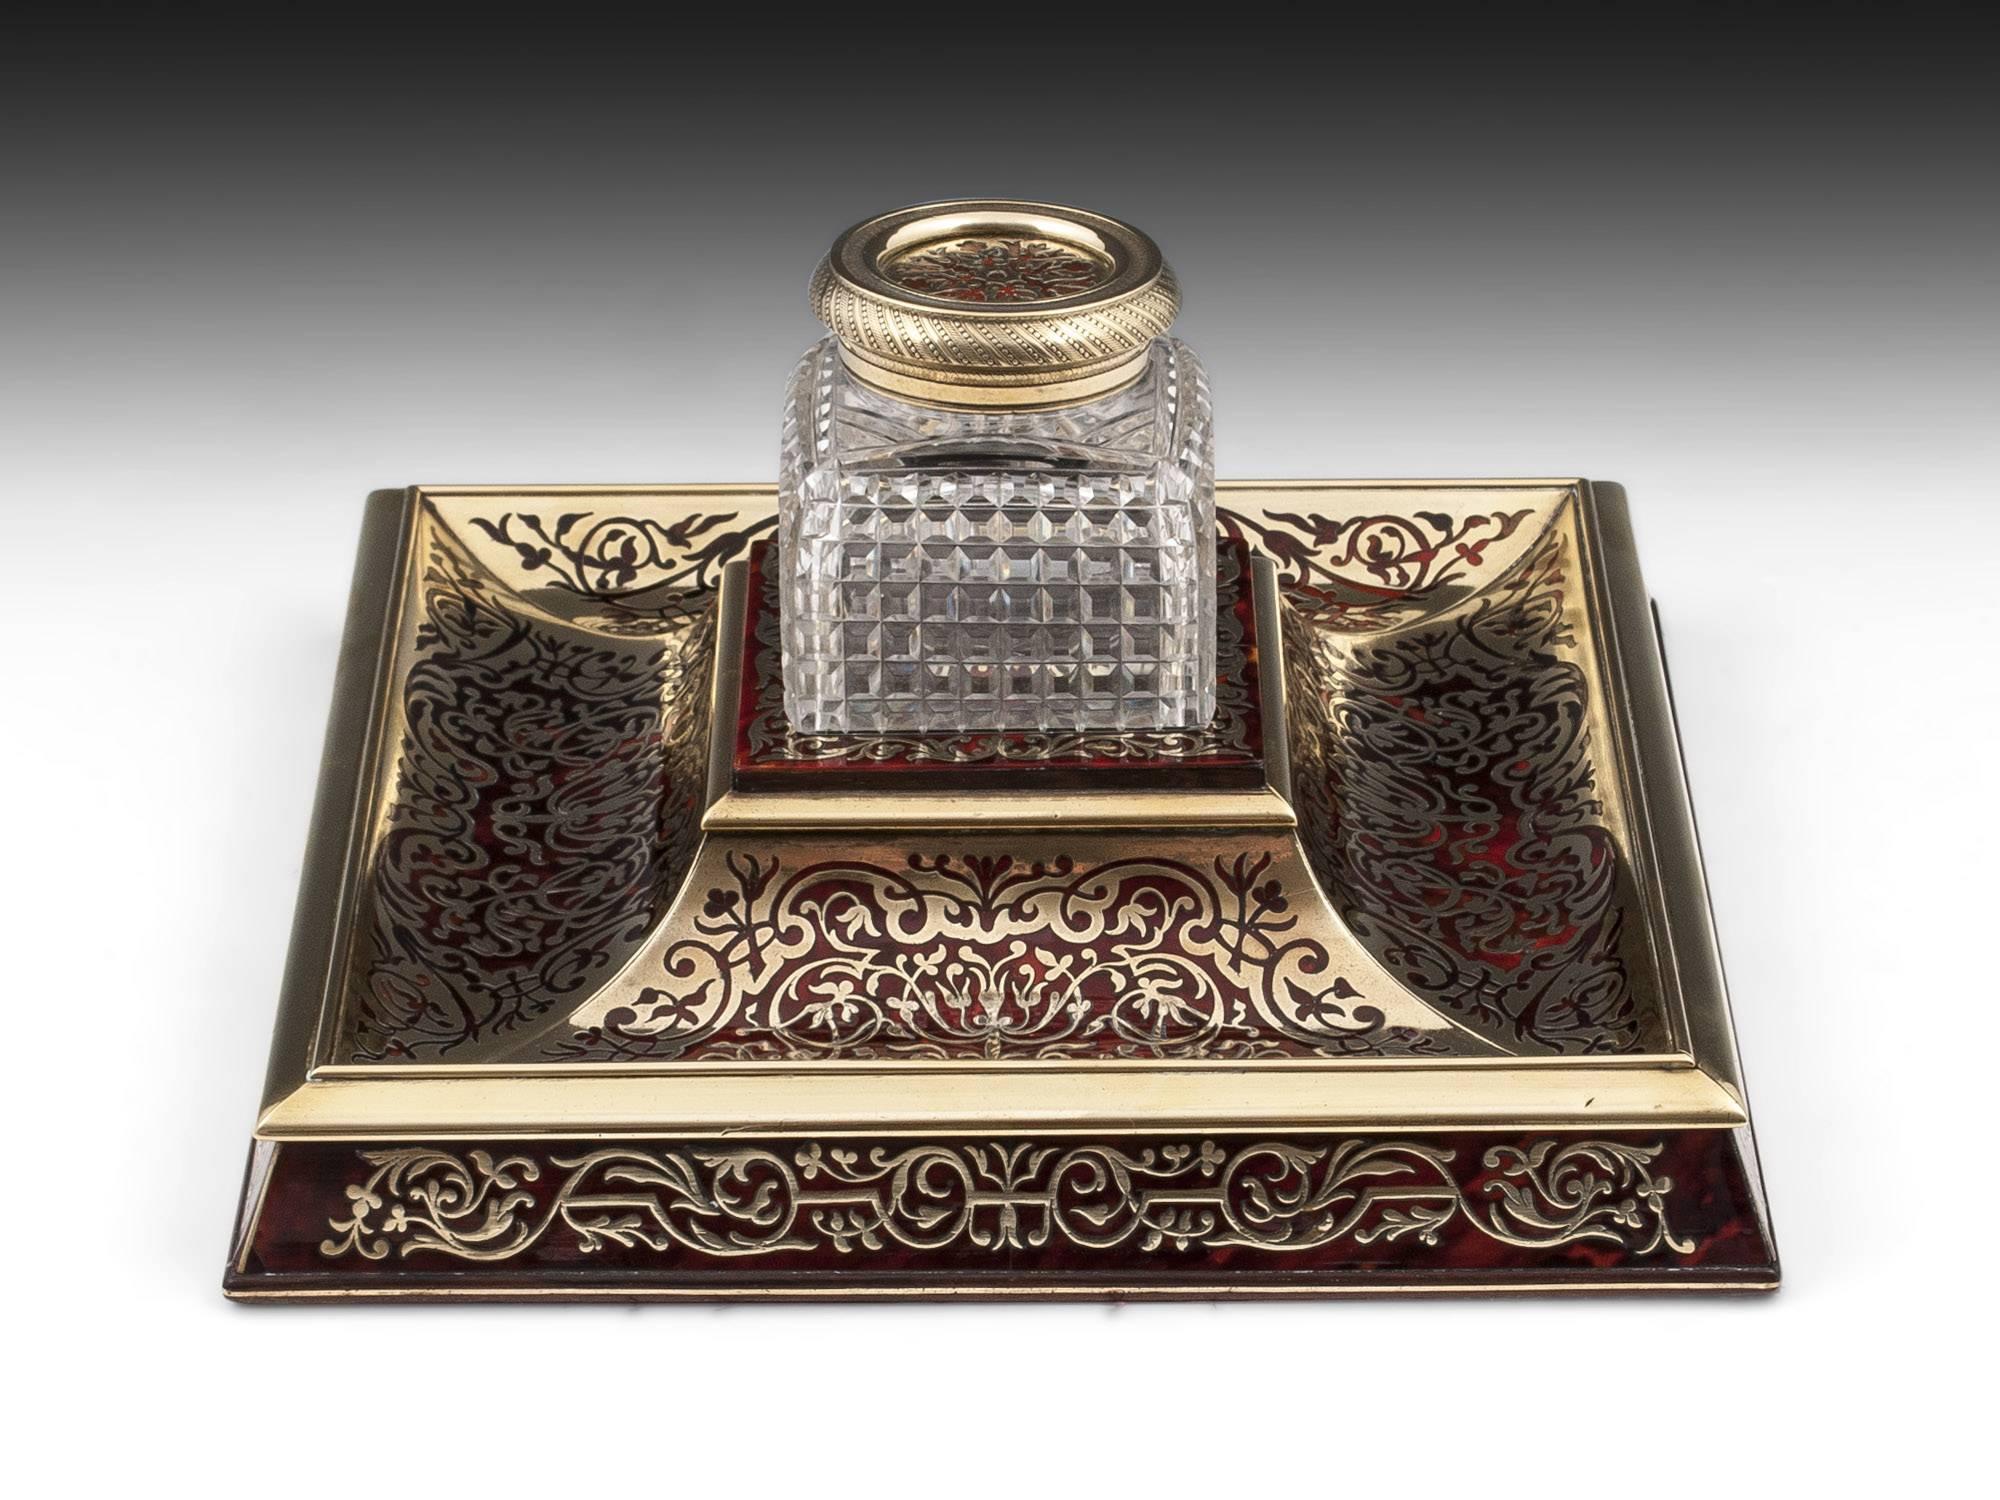 Stunning antique Boulle desk set comprising a stationery box, clock, pen Stand with inkwell, two candle sticks and two standing picture frames.
The candlesticks are labelled: Asprey & Co London
One of the picture frames is labelled on the stand: